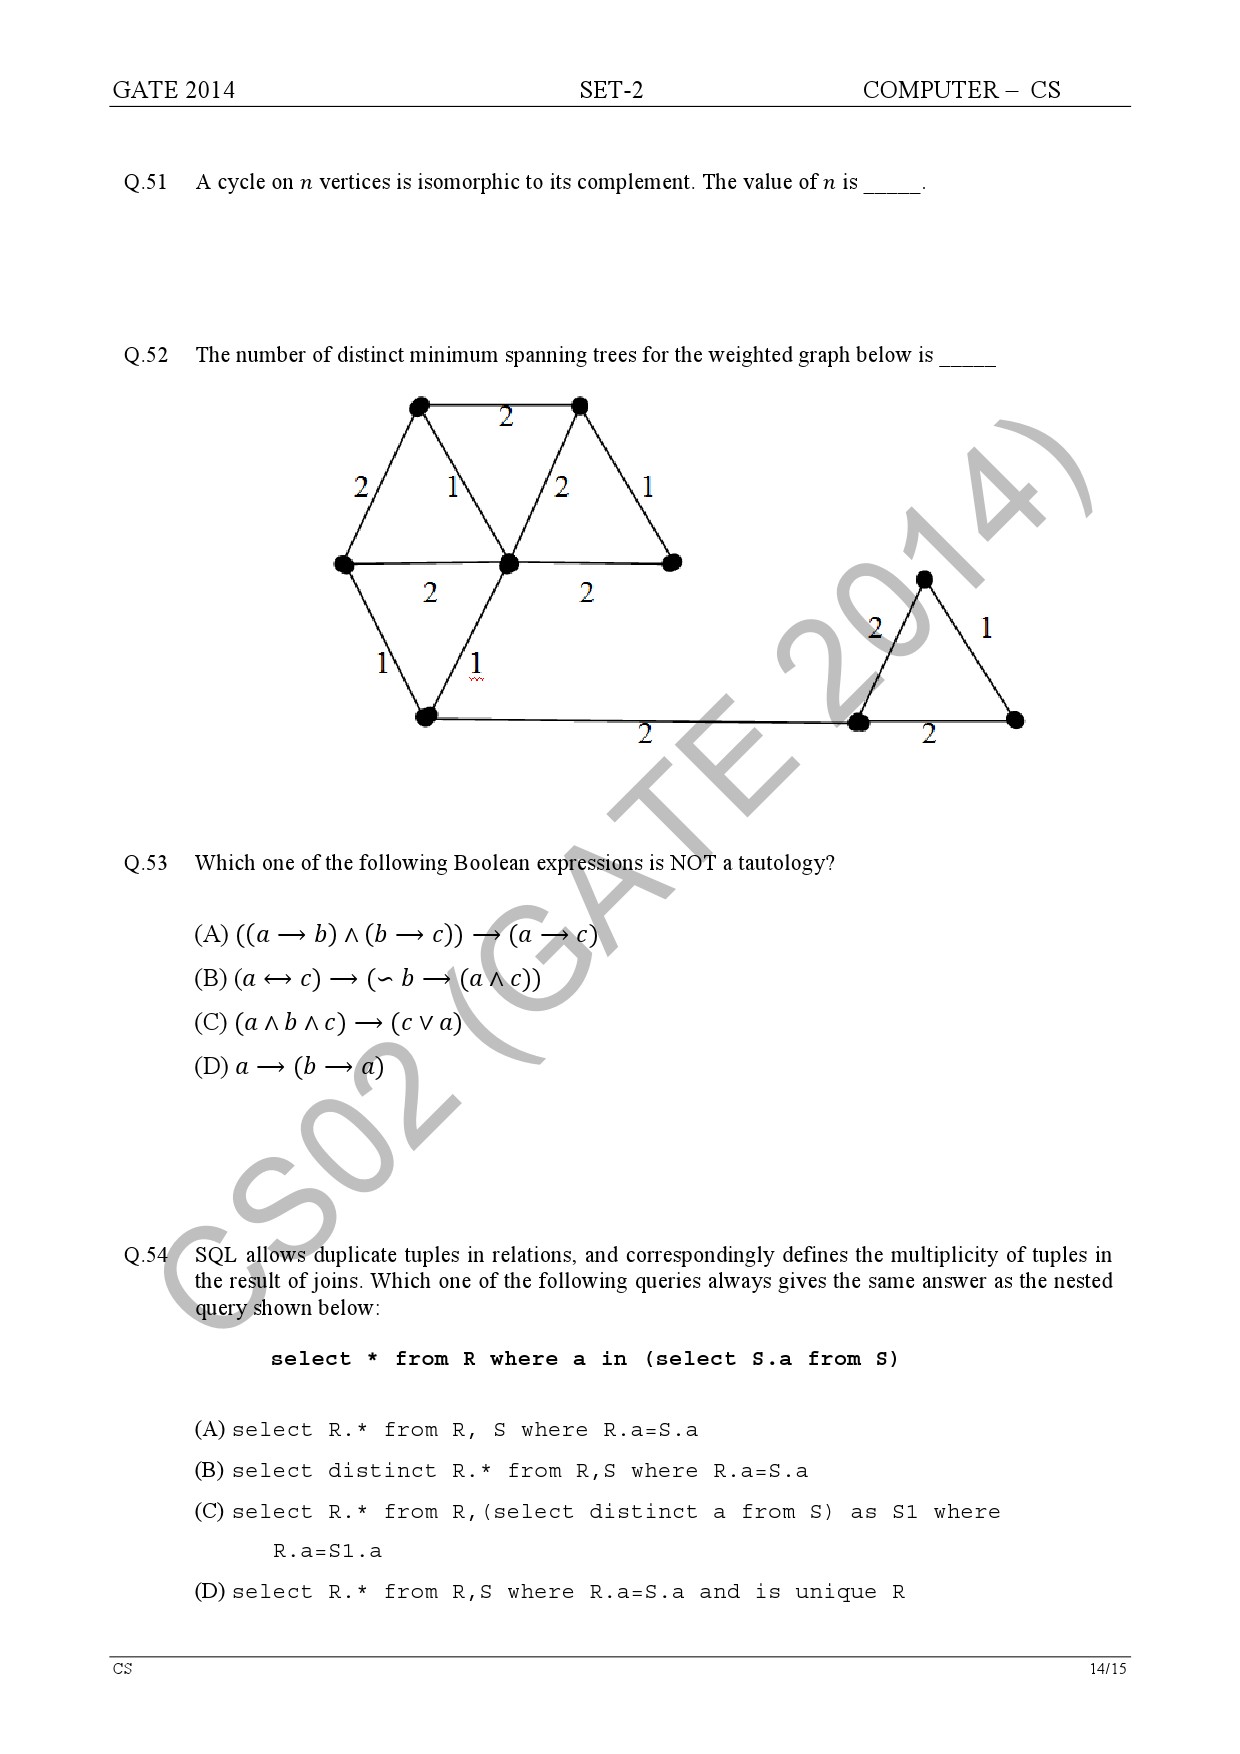 GATE Exam Question Paper 2014 Computer Science and Information Technology Set 2 20